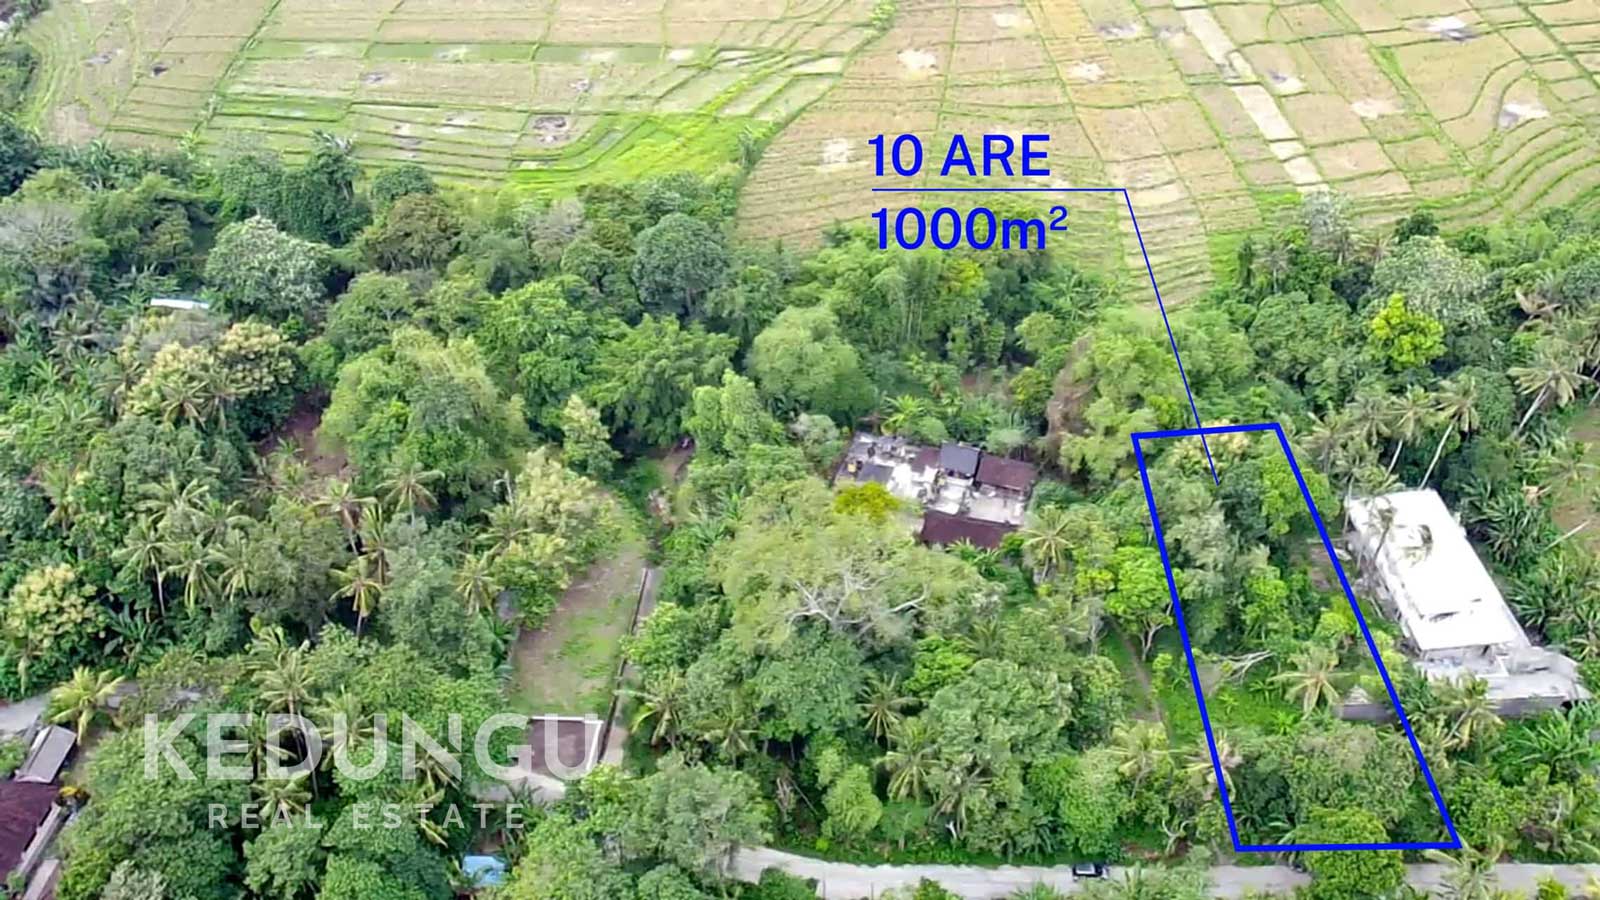 land for lease with ricefield view kedungu 10 are KRE Watermark 02